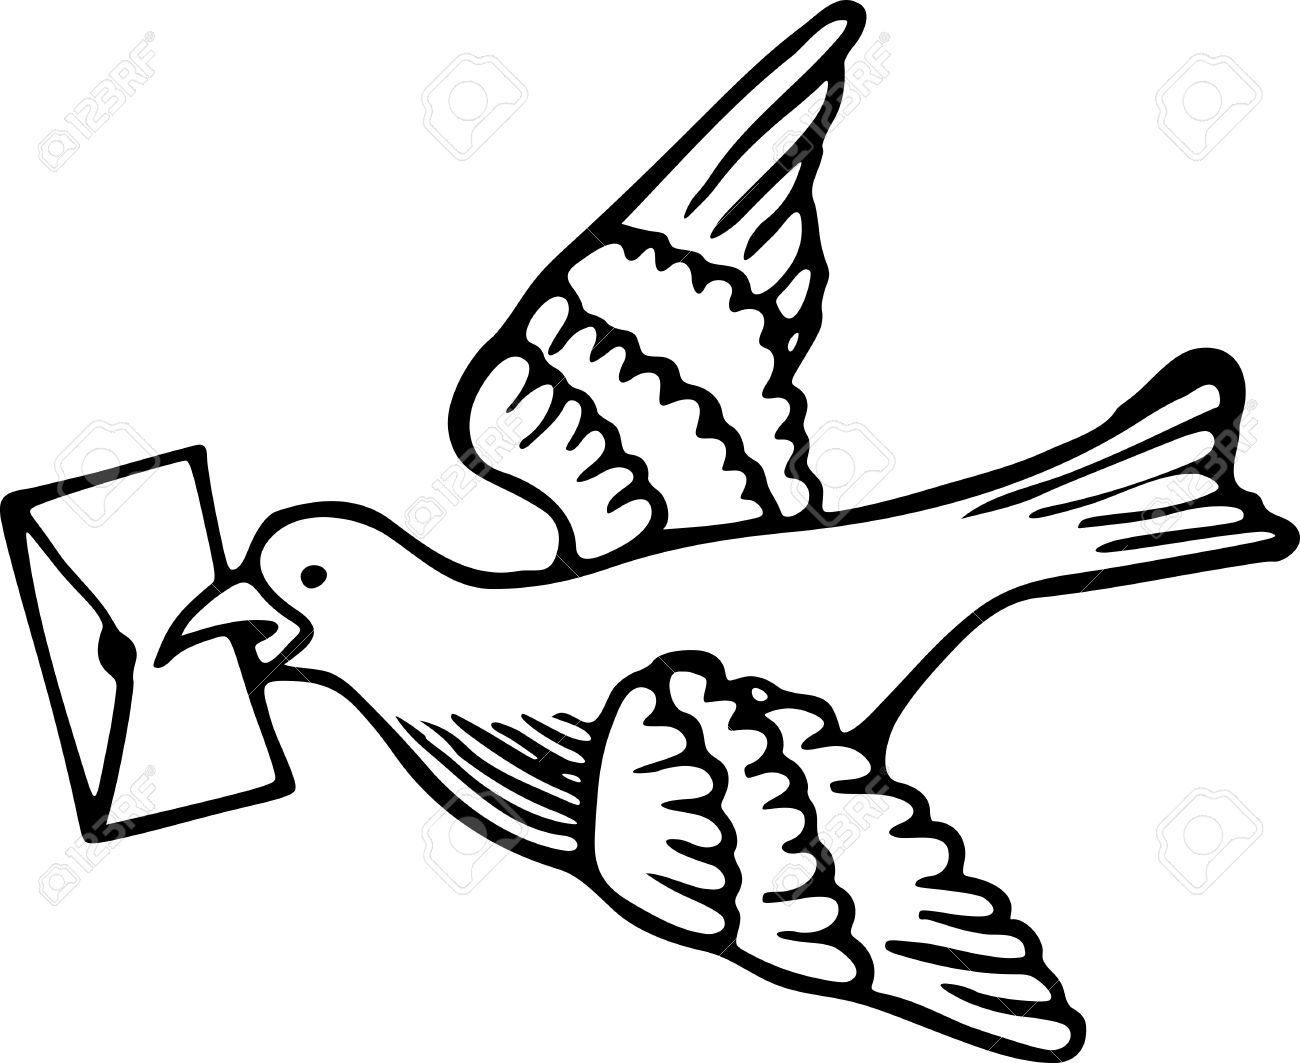 Simple Black And White Line Drawing Of A Dove Carrying A Letter.